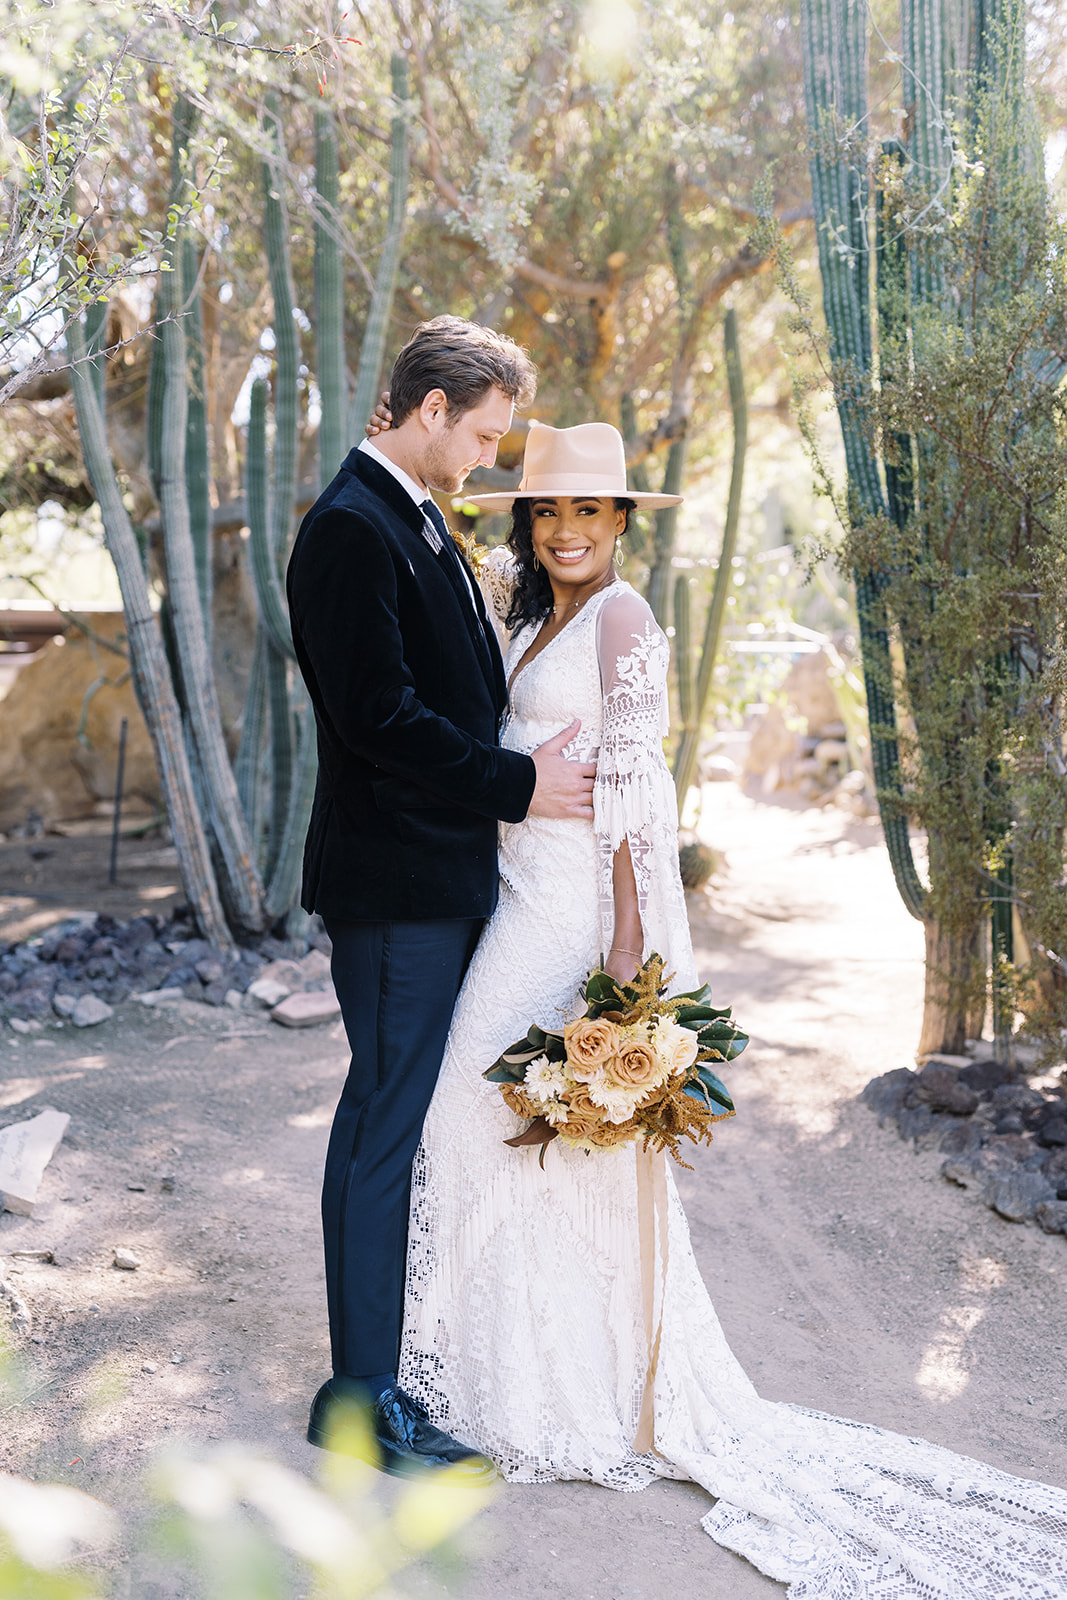 Woman smiling at camera while man looks at her while holding her. They are surrounded by desert cactus and are in a private area. Desert elopement planning